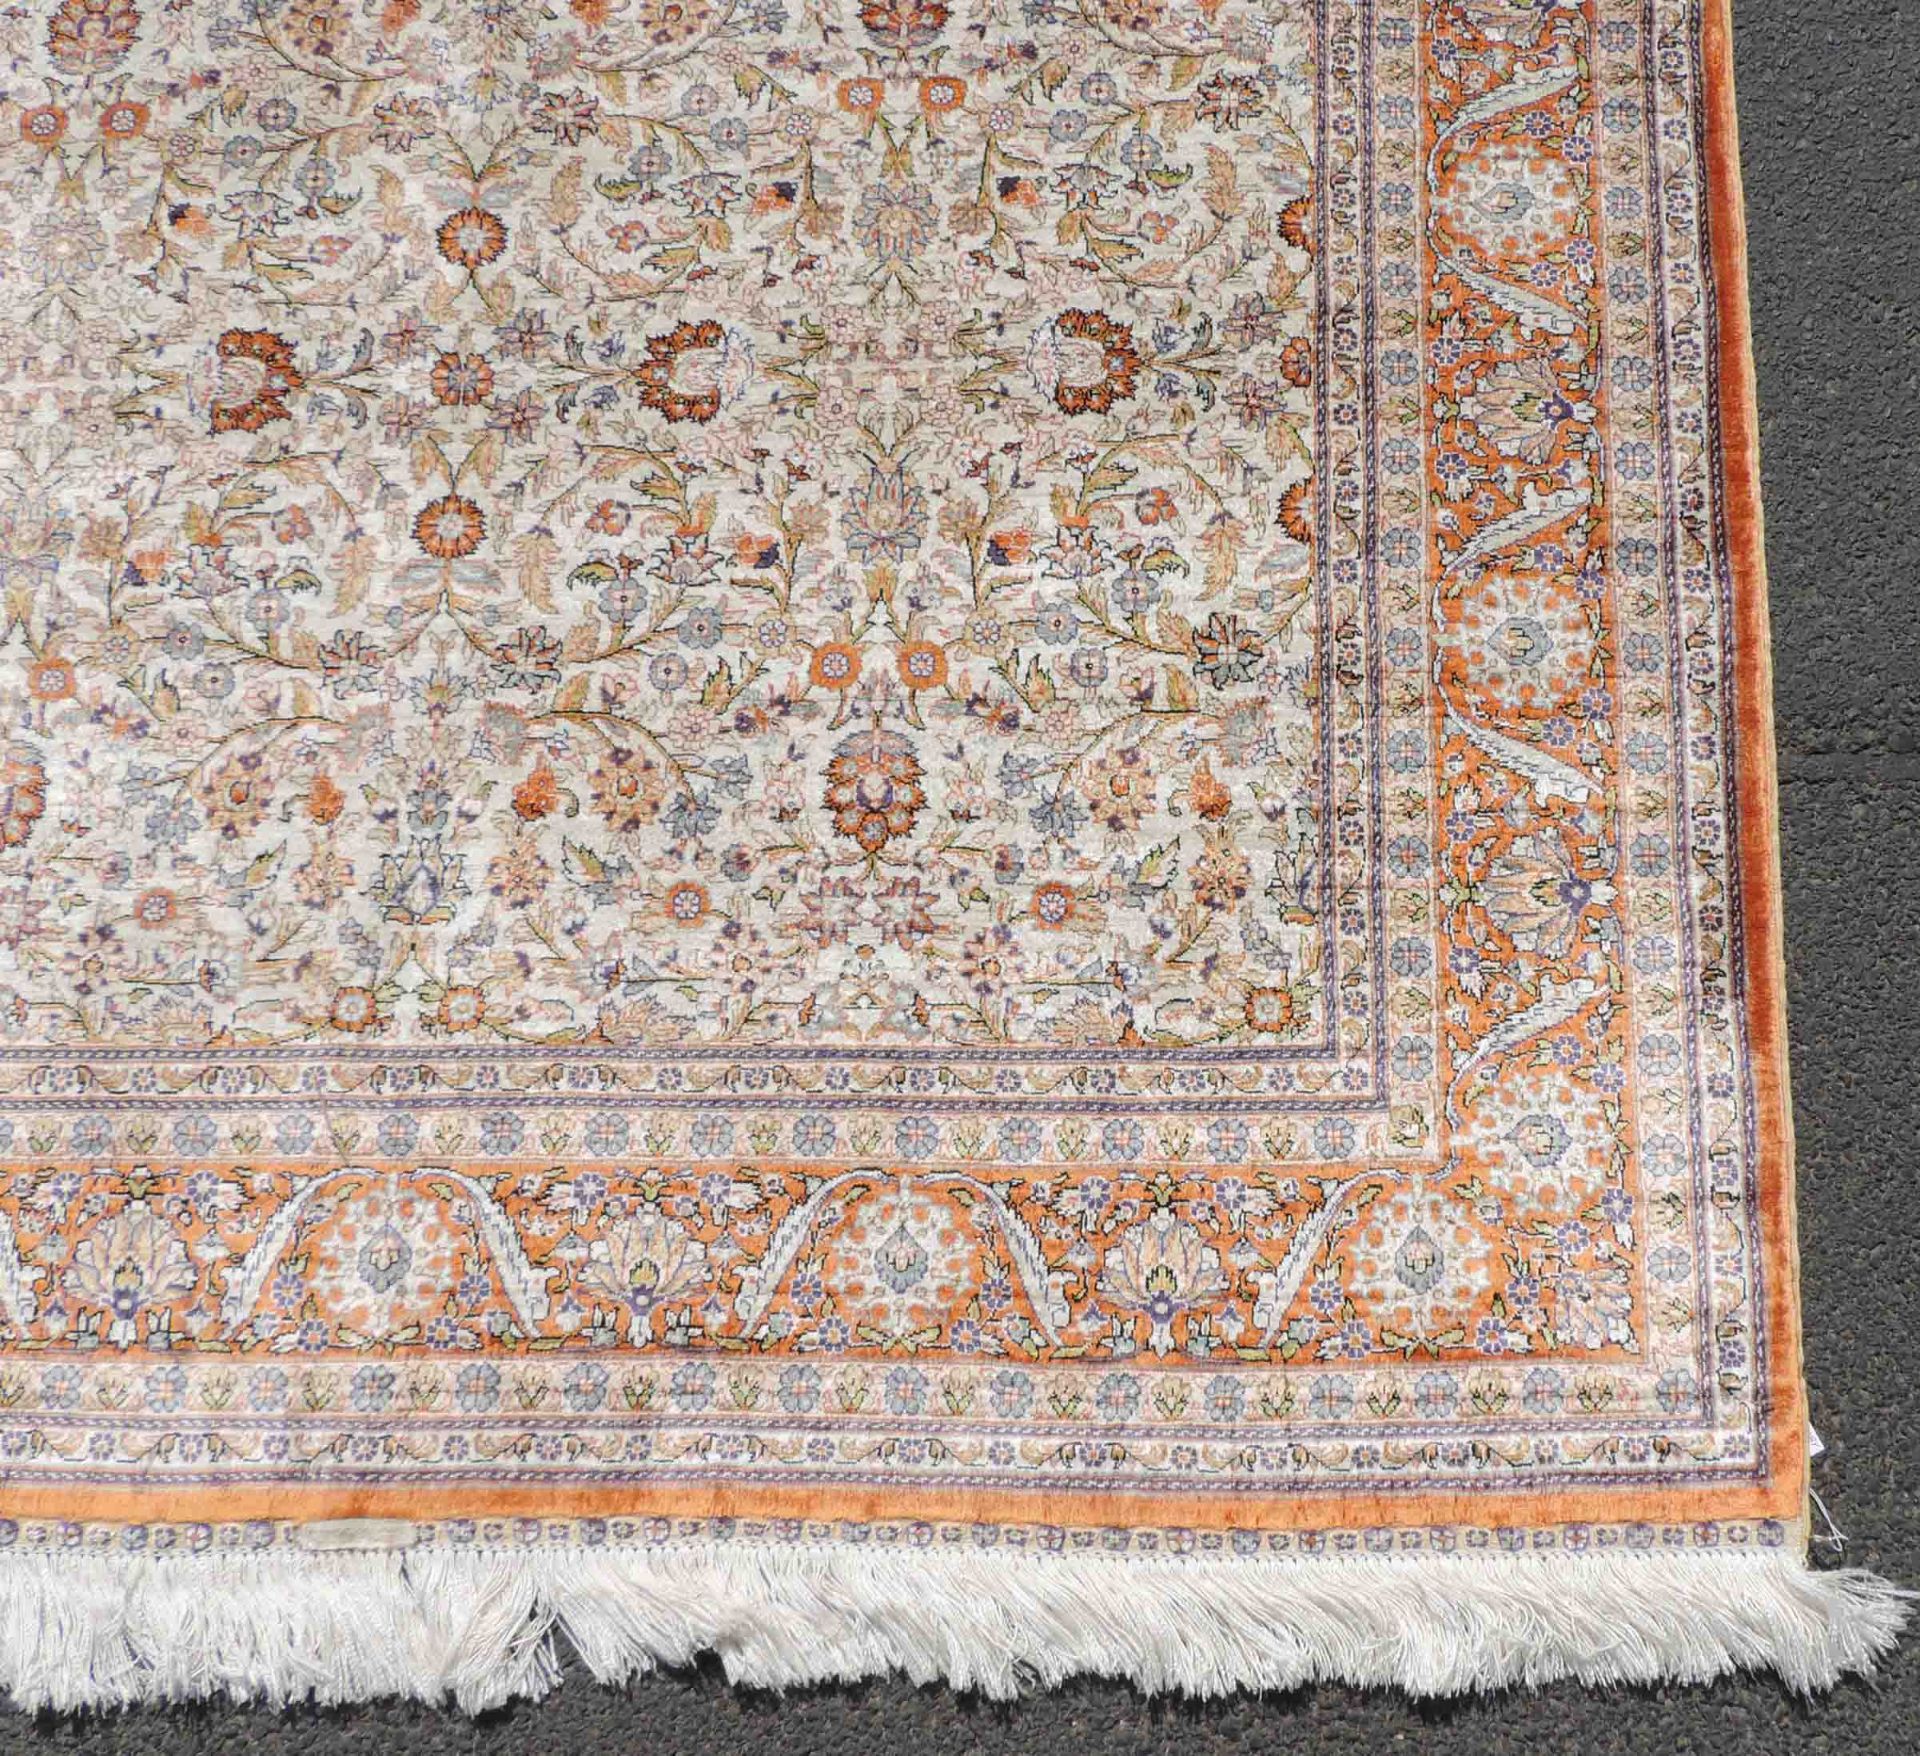 Hereke silk rug. Turkey. Signed. Extremely fine weave.180 cm x 128 cm. Knotted by hand. Silk on - Image 5 of 11